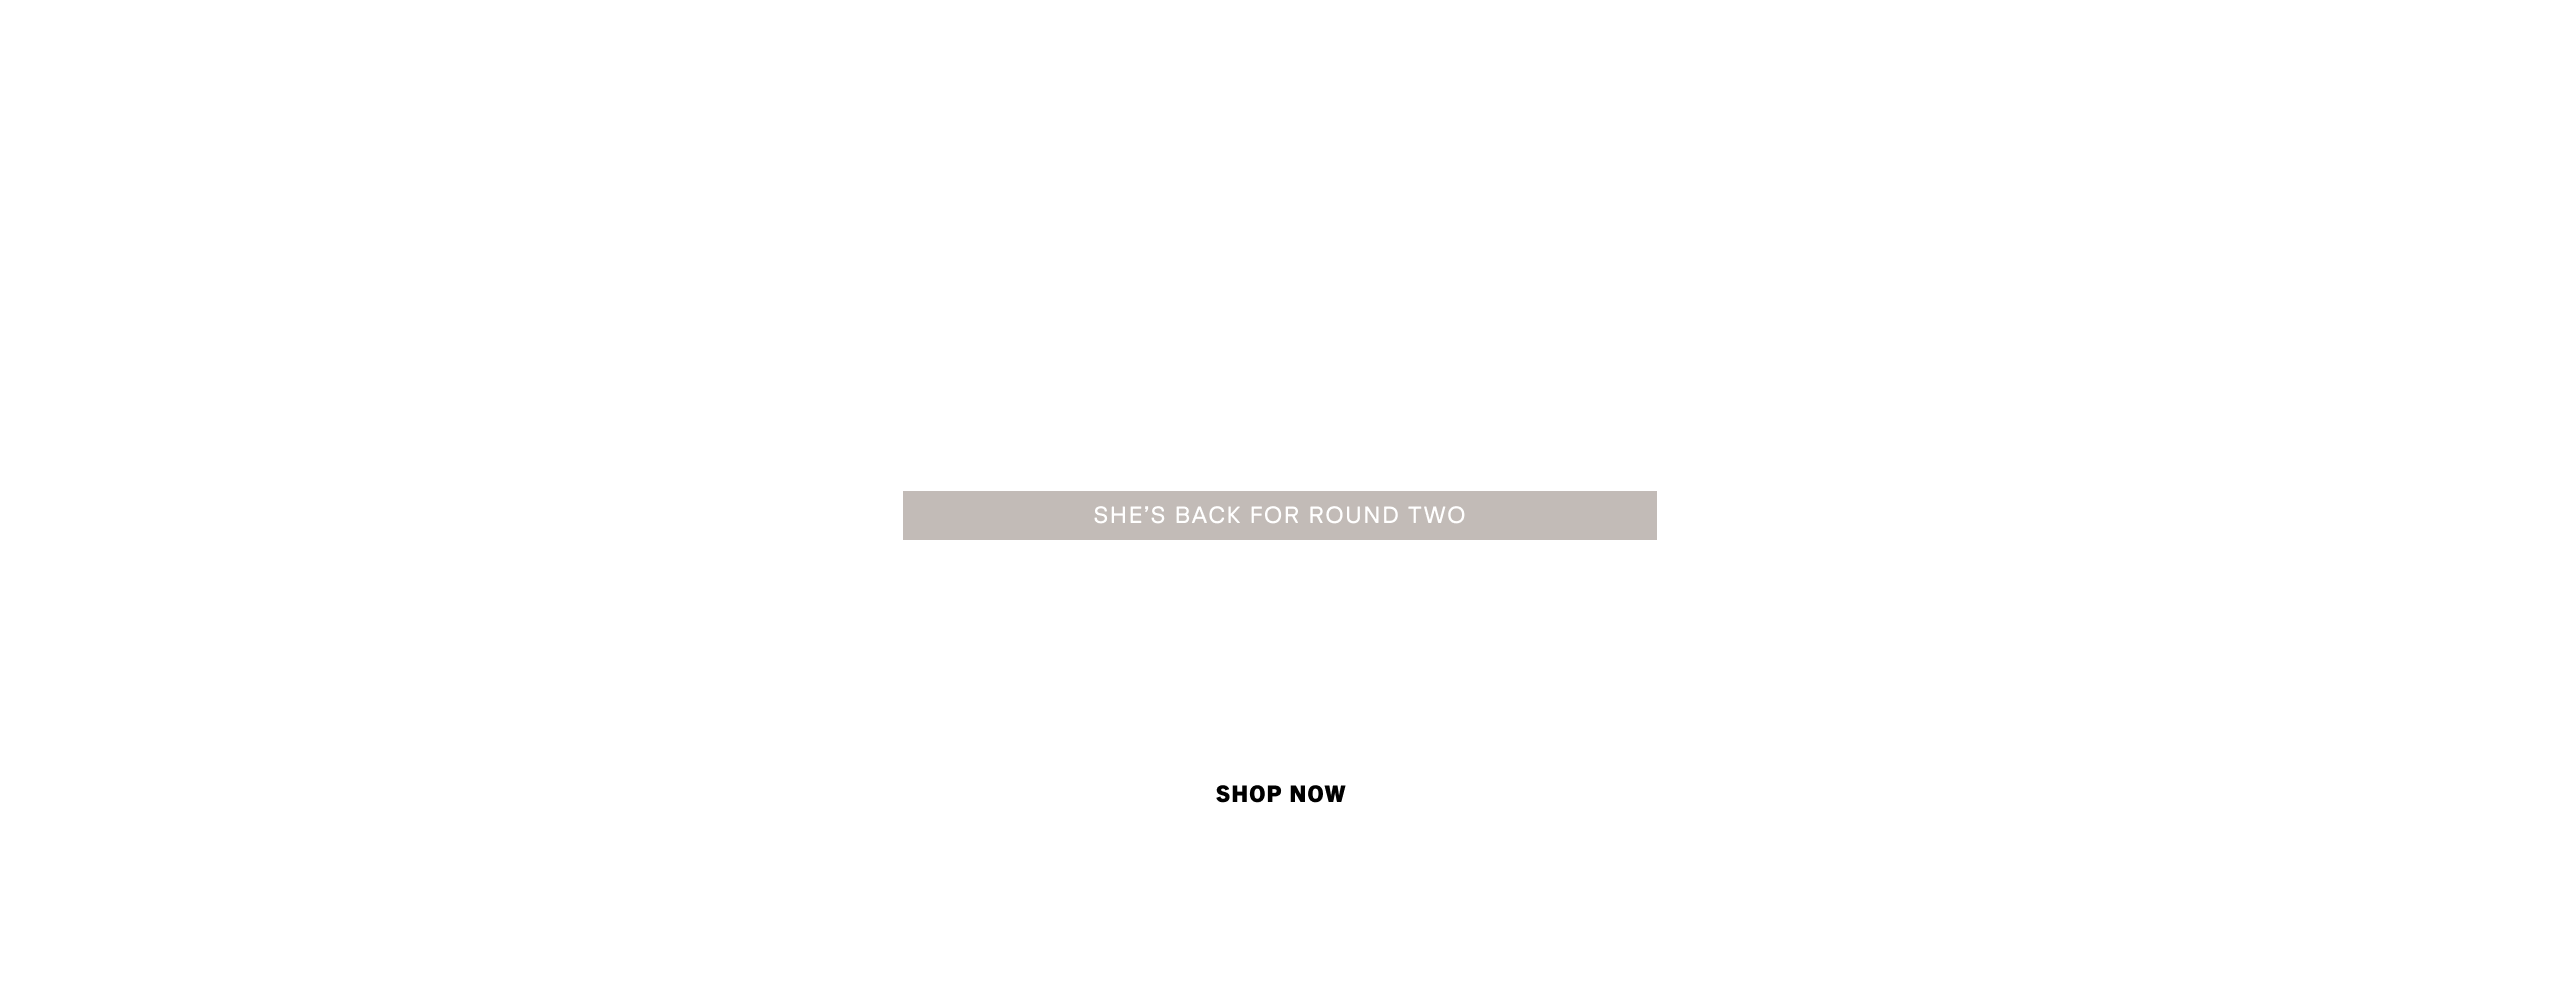 Shop the Khloe edit! She's back for round two! Click to unlock new VIP offers: 2 for $24 bottoms + 70% off everything.